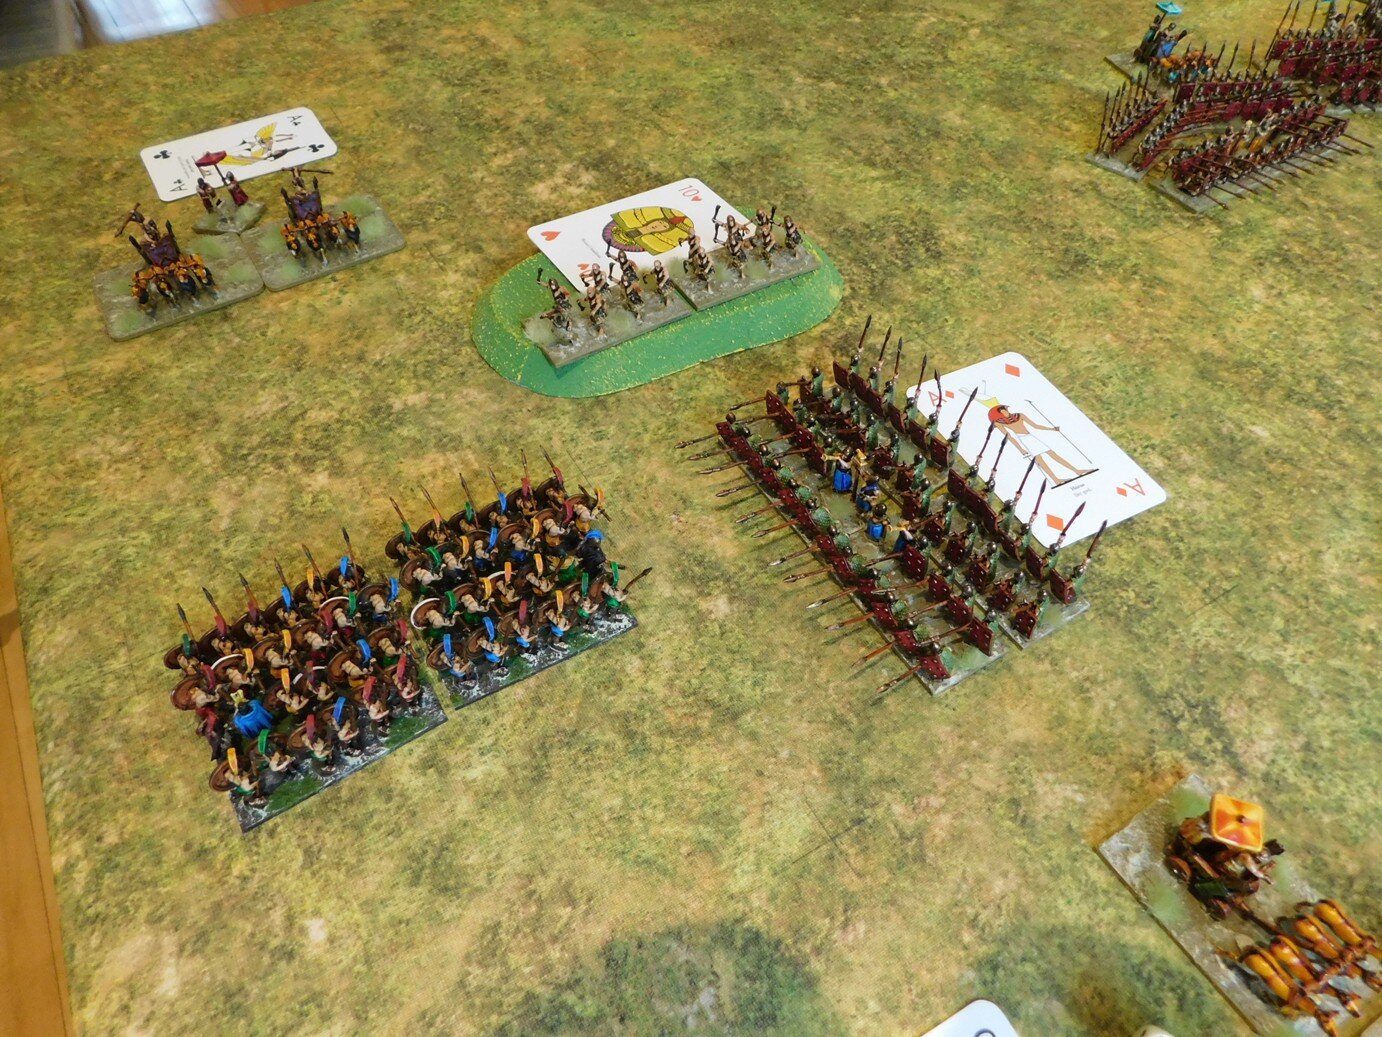 One unit of Hoplites taken out by the second line of battlecars. City militia again fail to charge a flank.